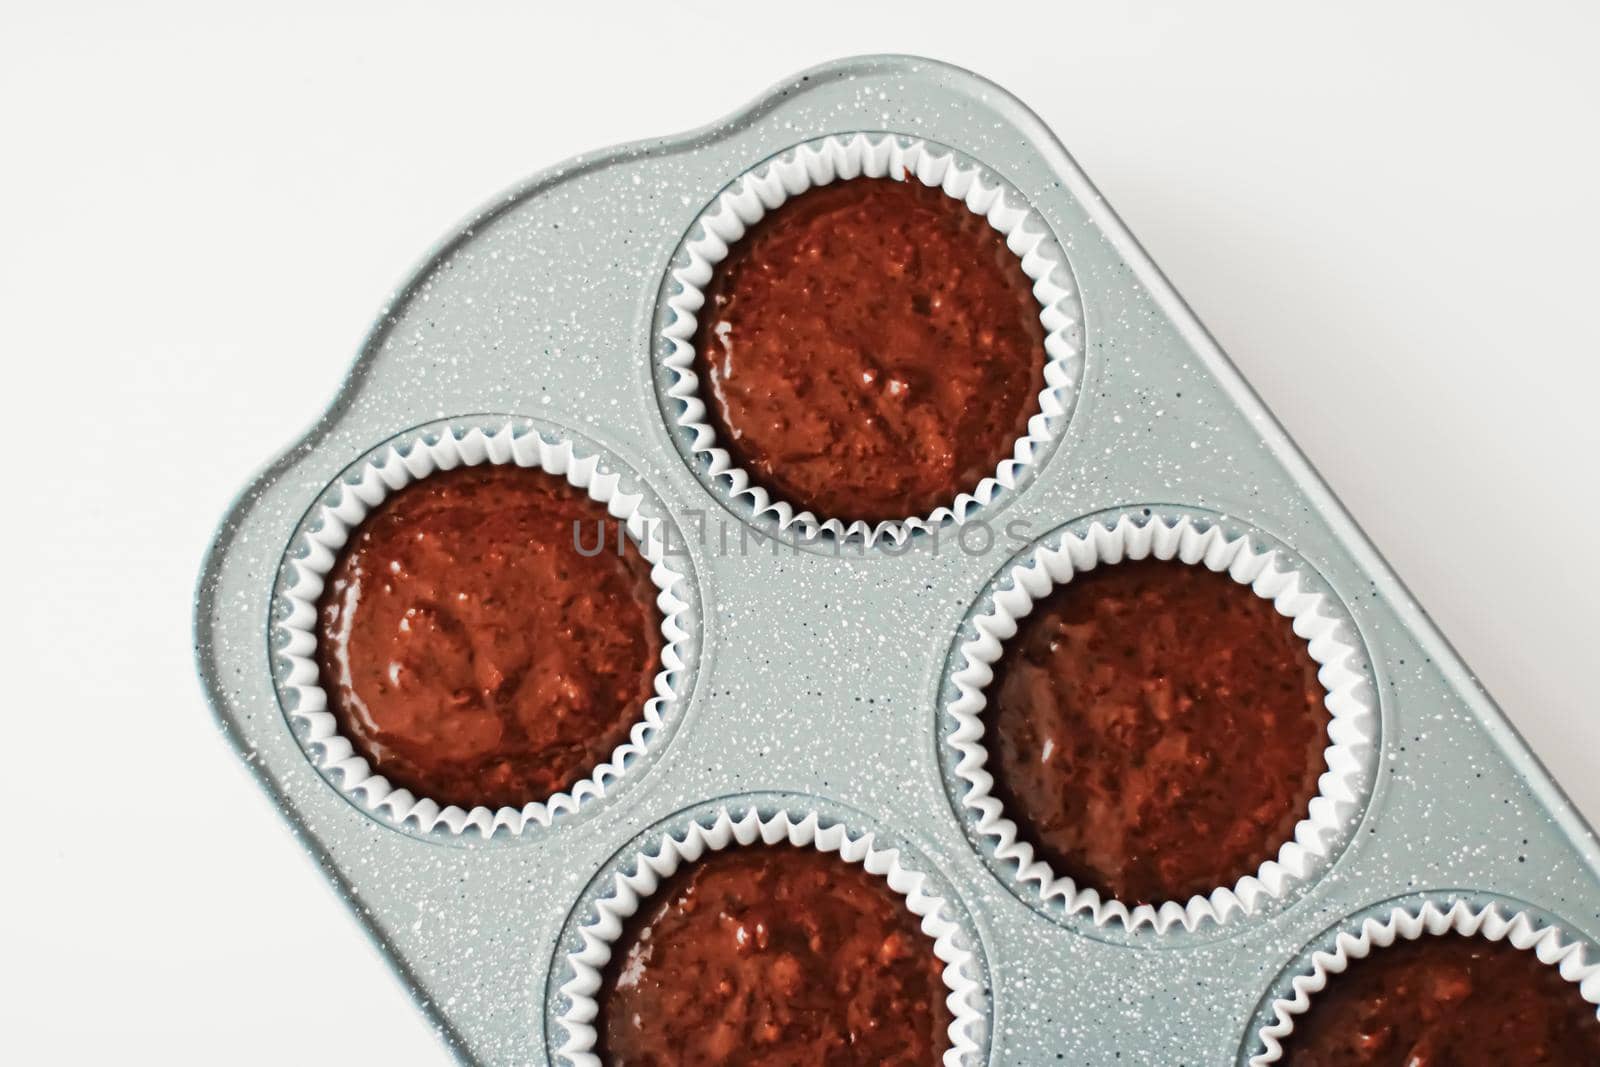 Chocolate muffin or cupcake batter in a pan ready to bake, homemade comfort food recipe concept